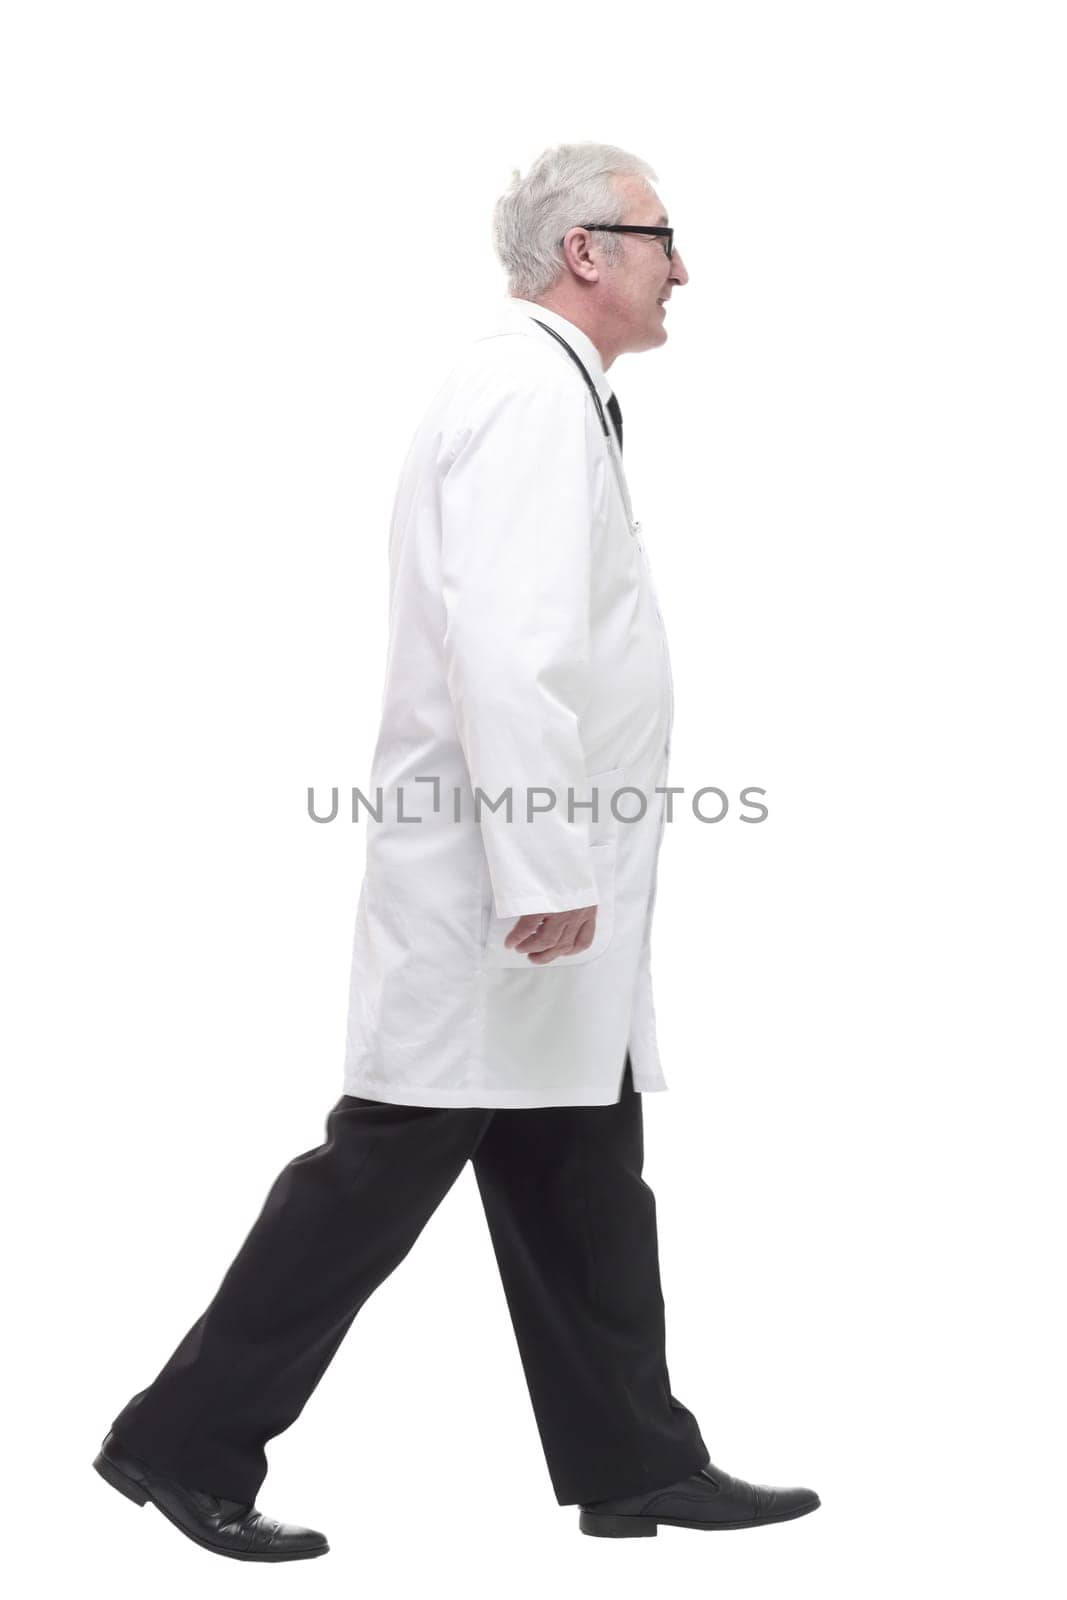 qualified mature doctor with stethoscope stepping forward. isolated on a white background.